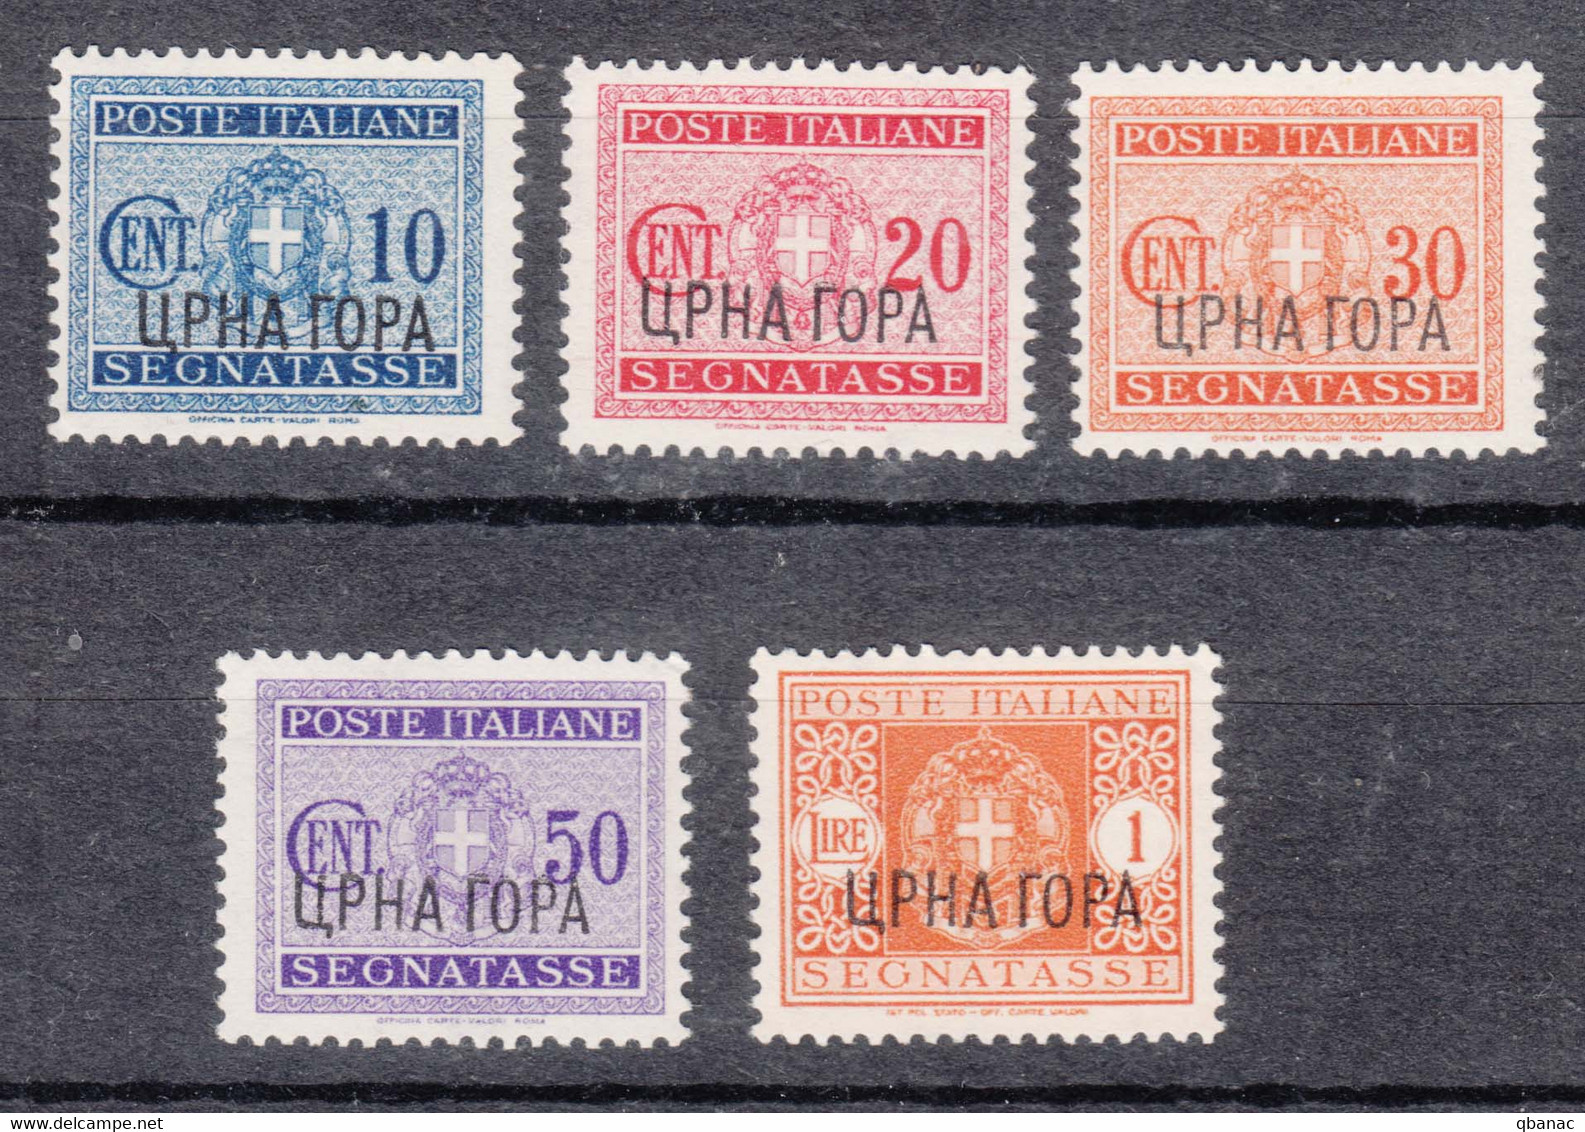 Italy Occupation Of Montenegro 1941 Postage Due Sassone#6-10 Mint Never Hinged - Montenegro